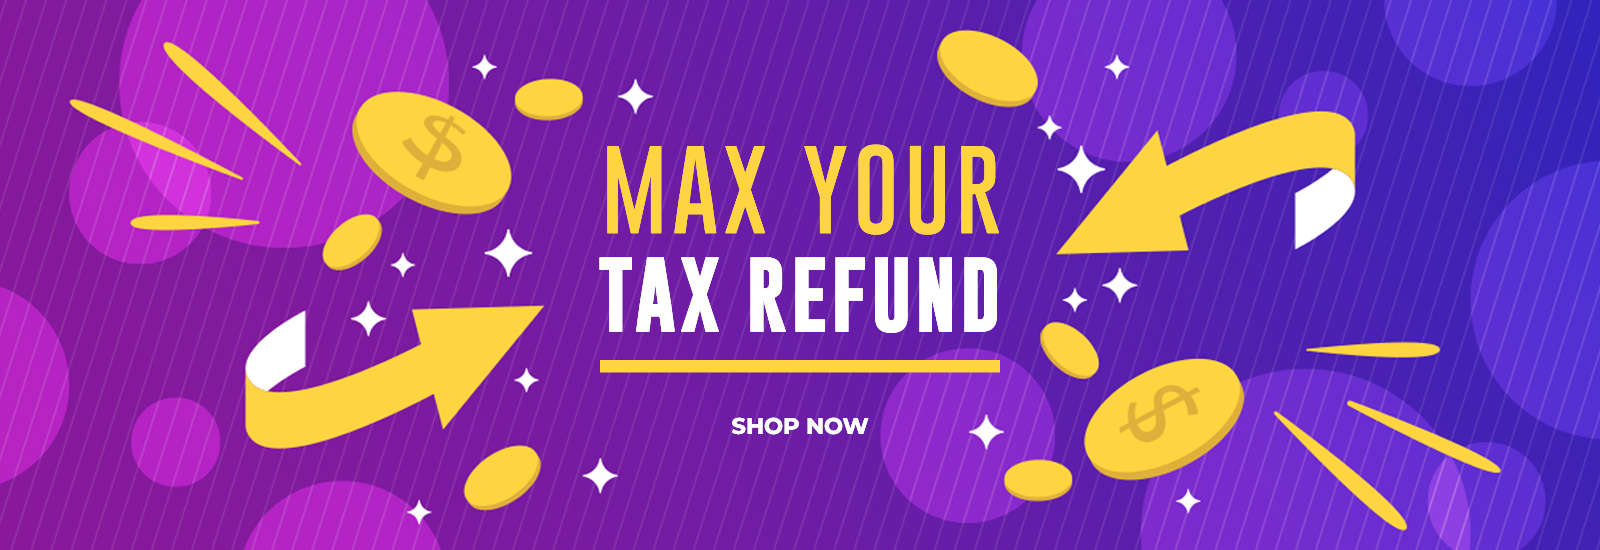 Max Your Tax Refund - Shop Now